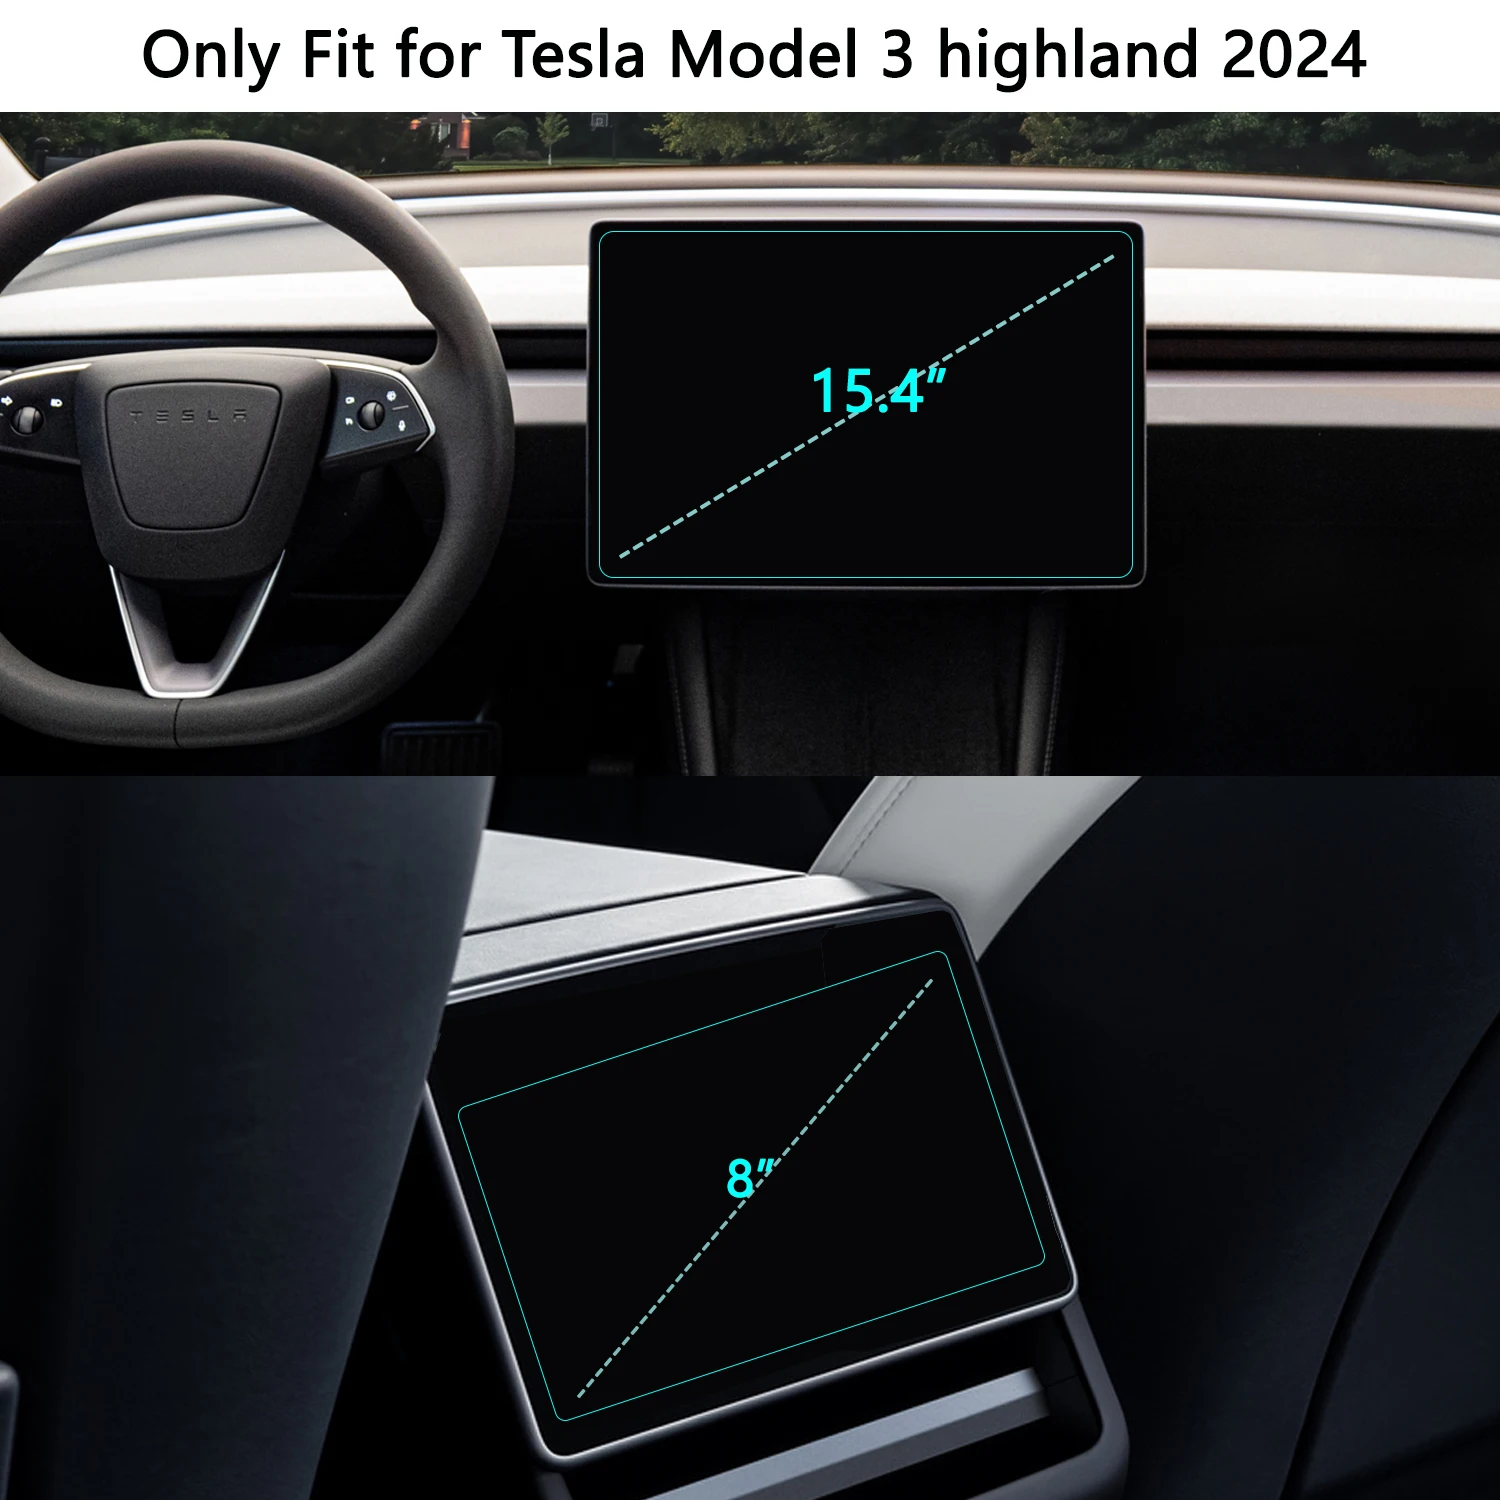 2024 Accessories 15.4 inch Front Screen & 8 Rear for New Tesla Model 3  Highland Y Screen Protector with Tool Tempered Glass